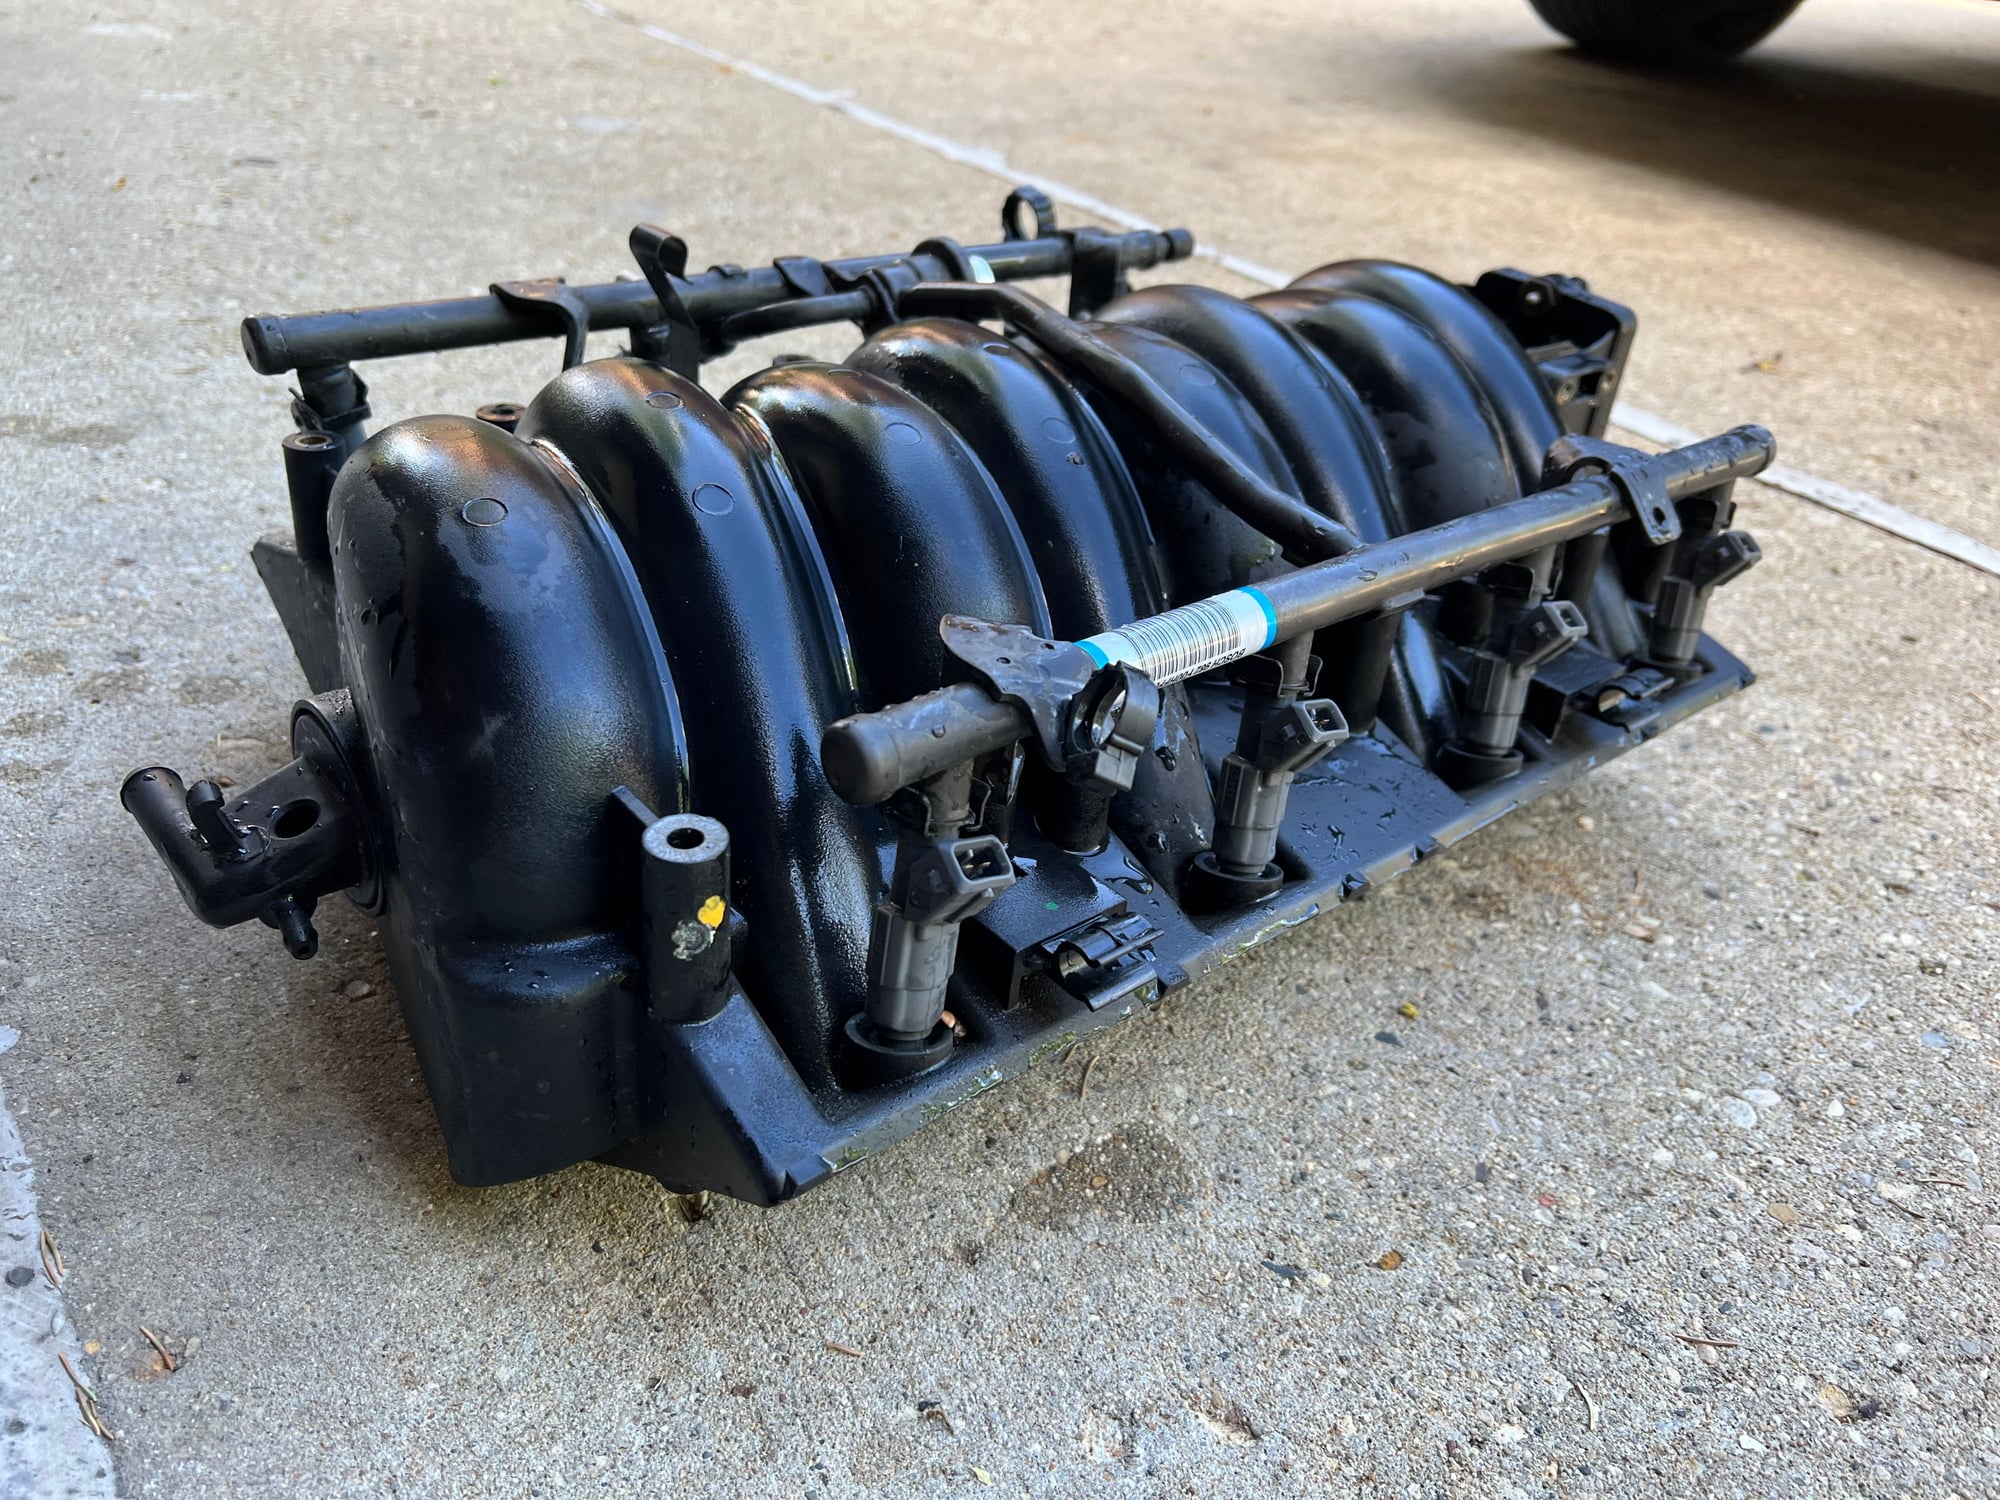 Engine - Intake/Fuel - Ls6 intake with fuel rail and injectors - Used - 0  All Models - Elgin, IL 60120, United States